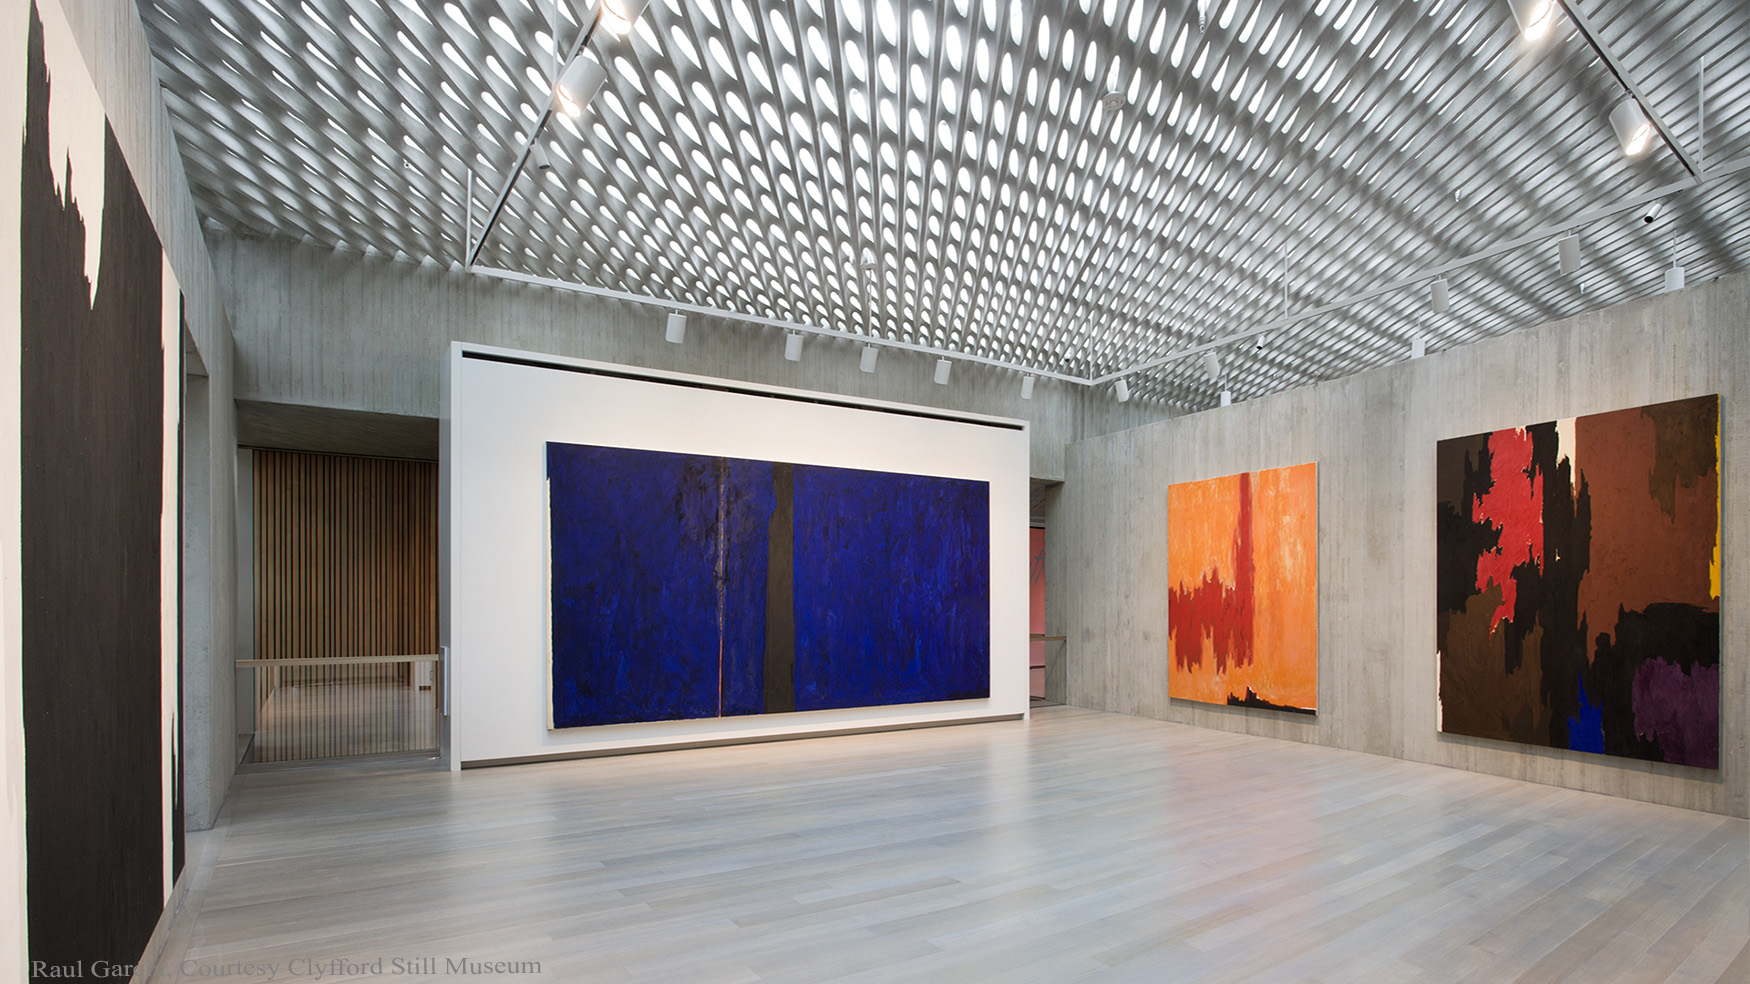 Gallery inside the Clyfford Still Museum with large abstract paintings on the wall and the ceiling visible